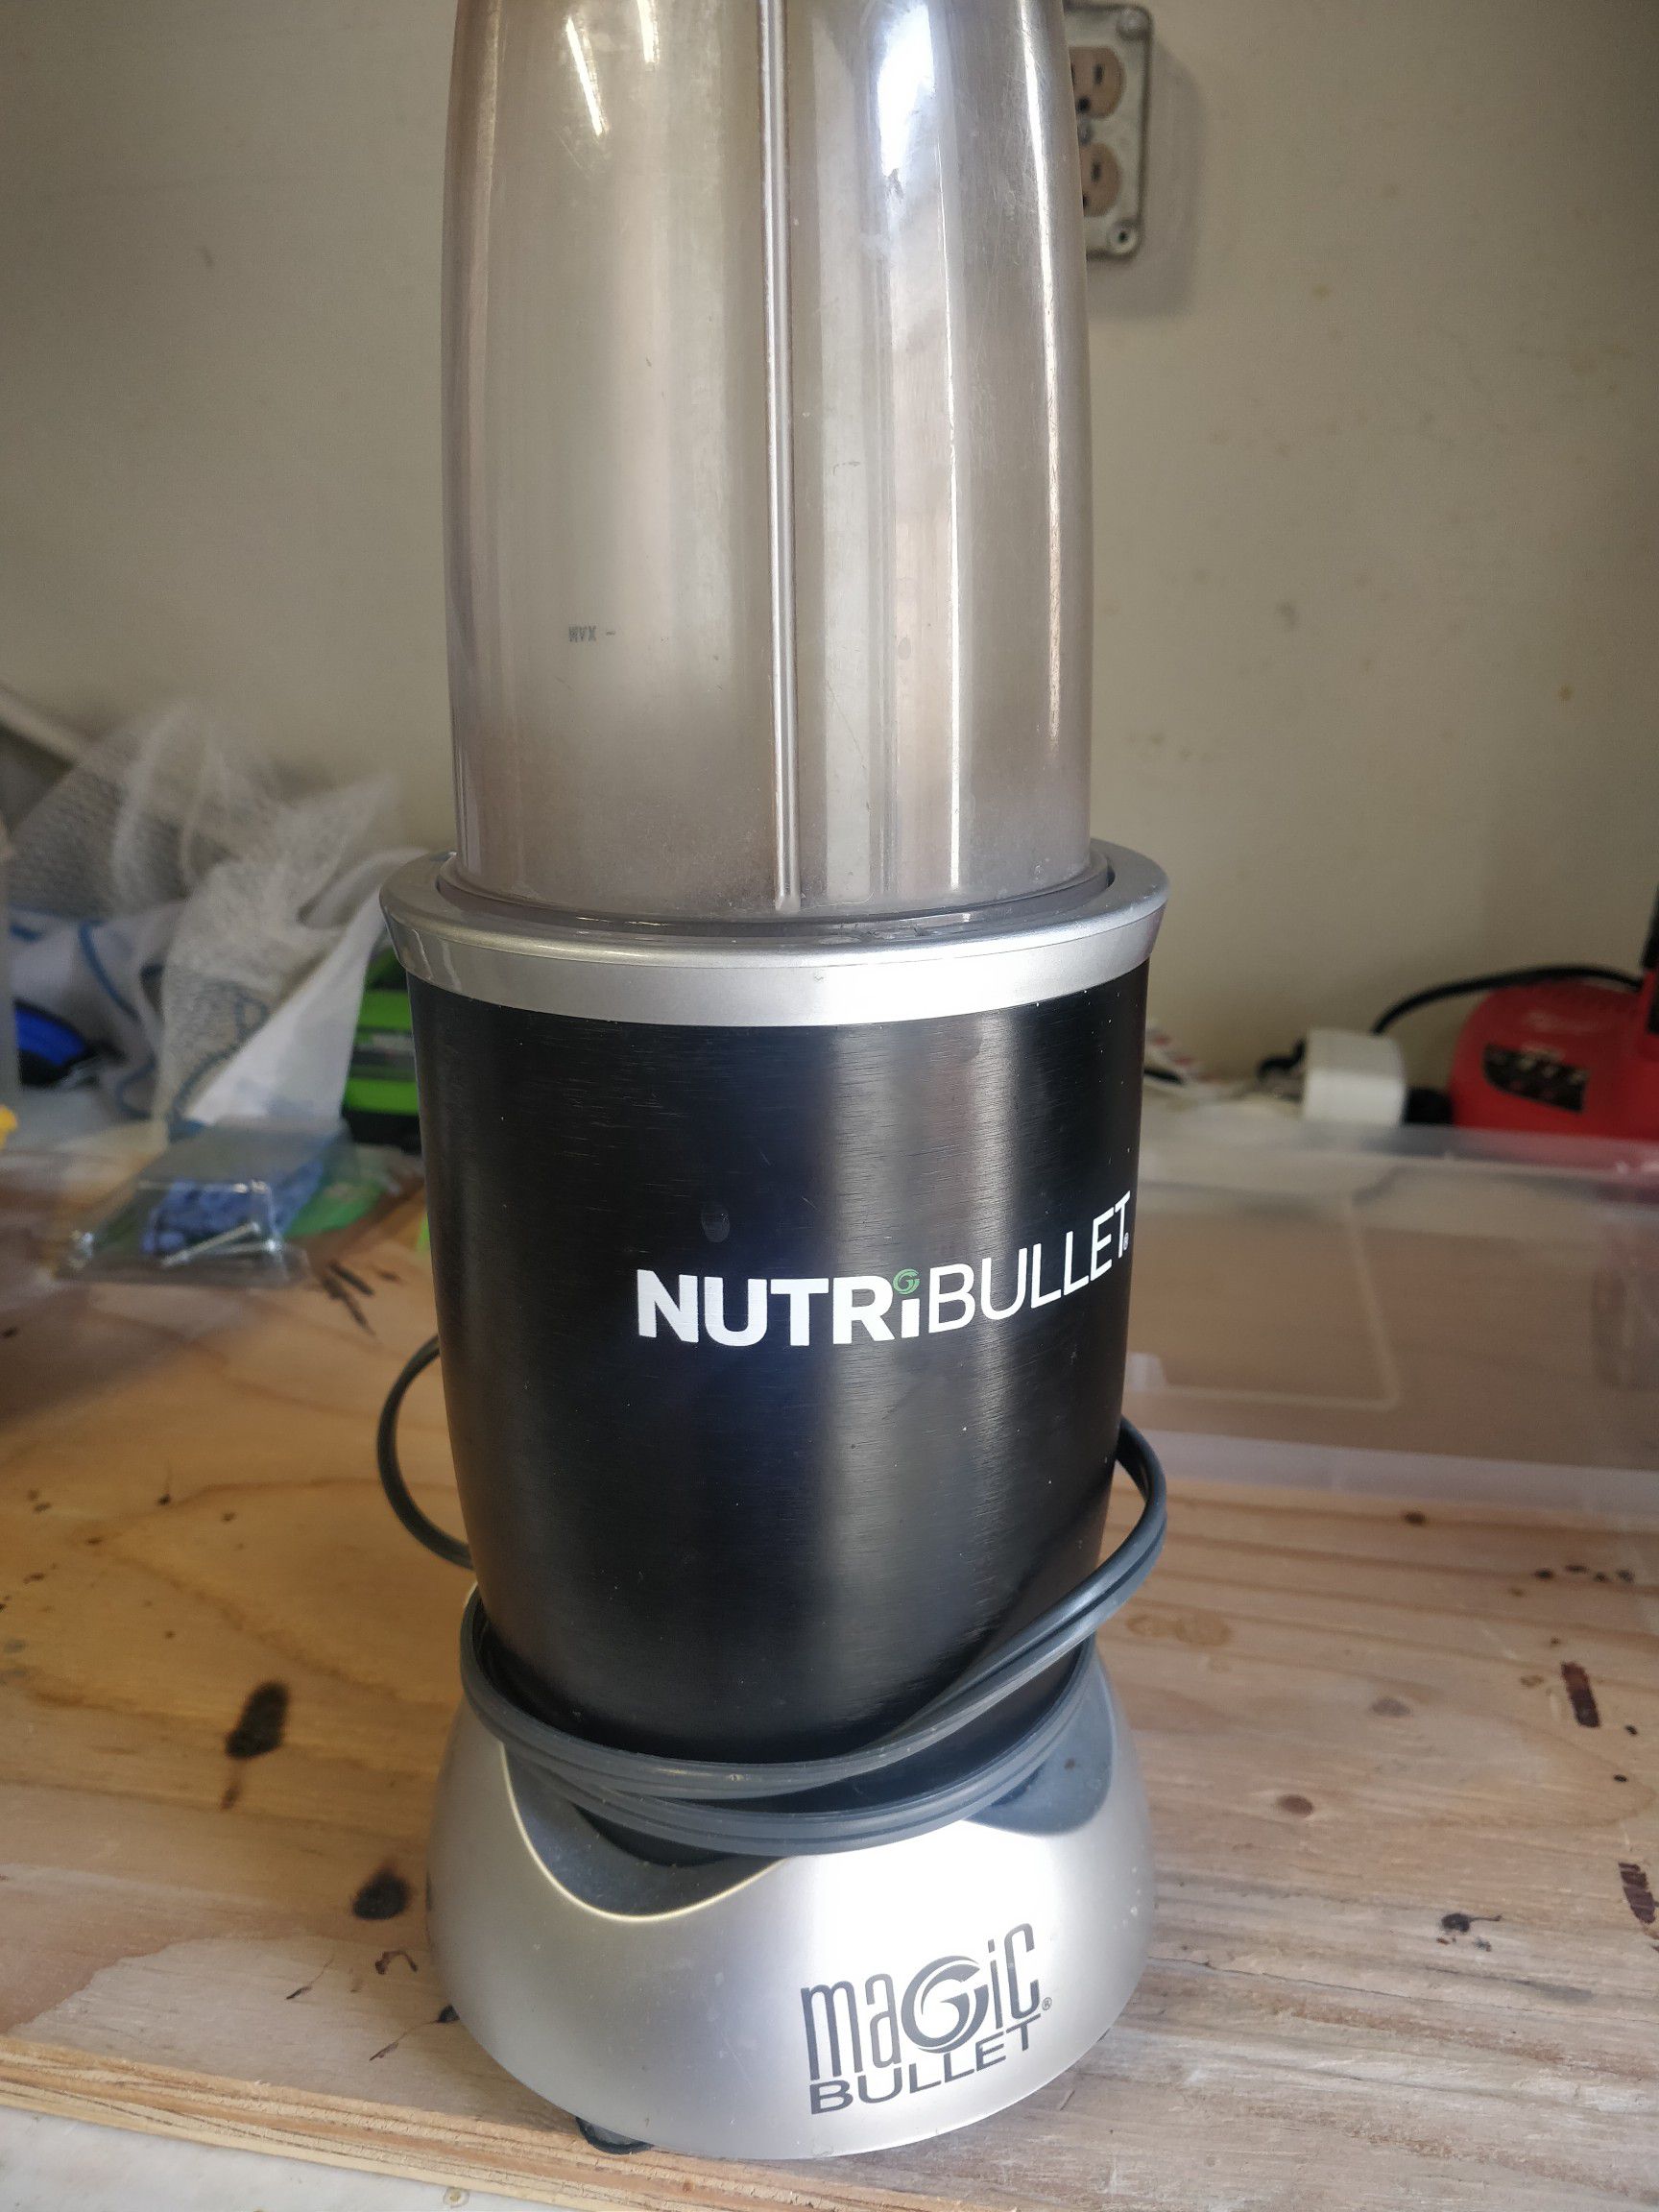 Nutribullet - $30 very good condition